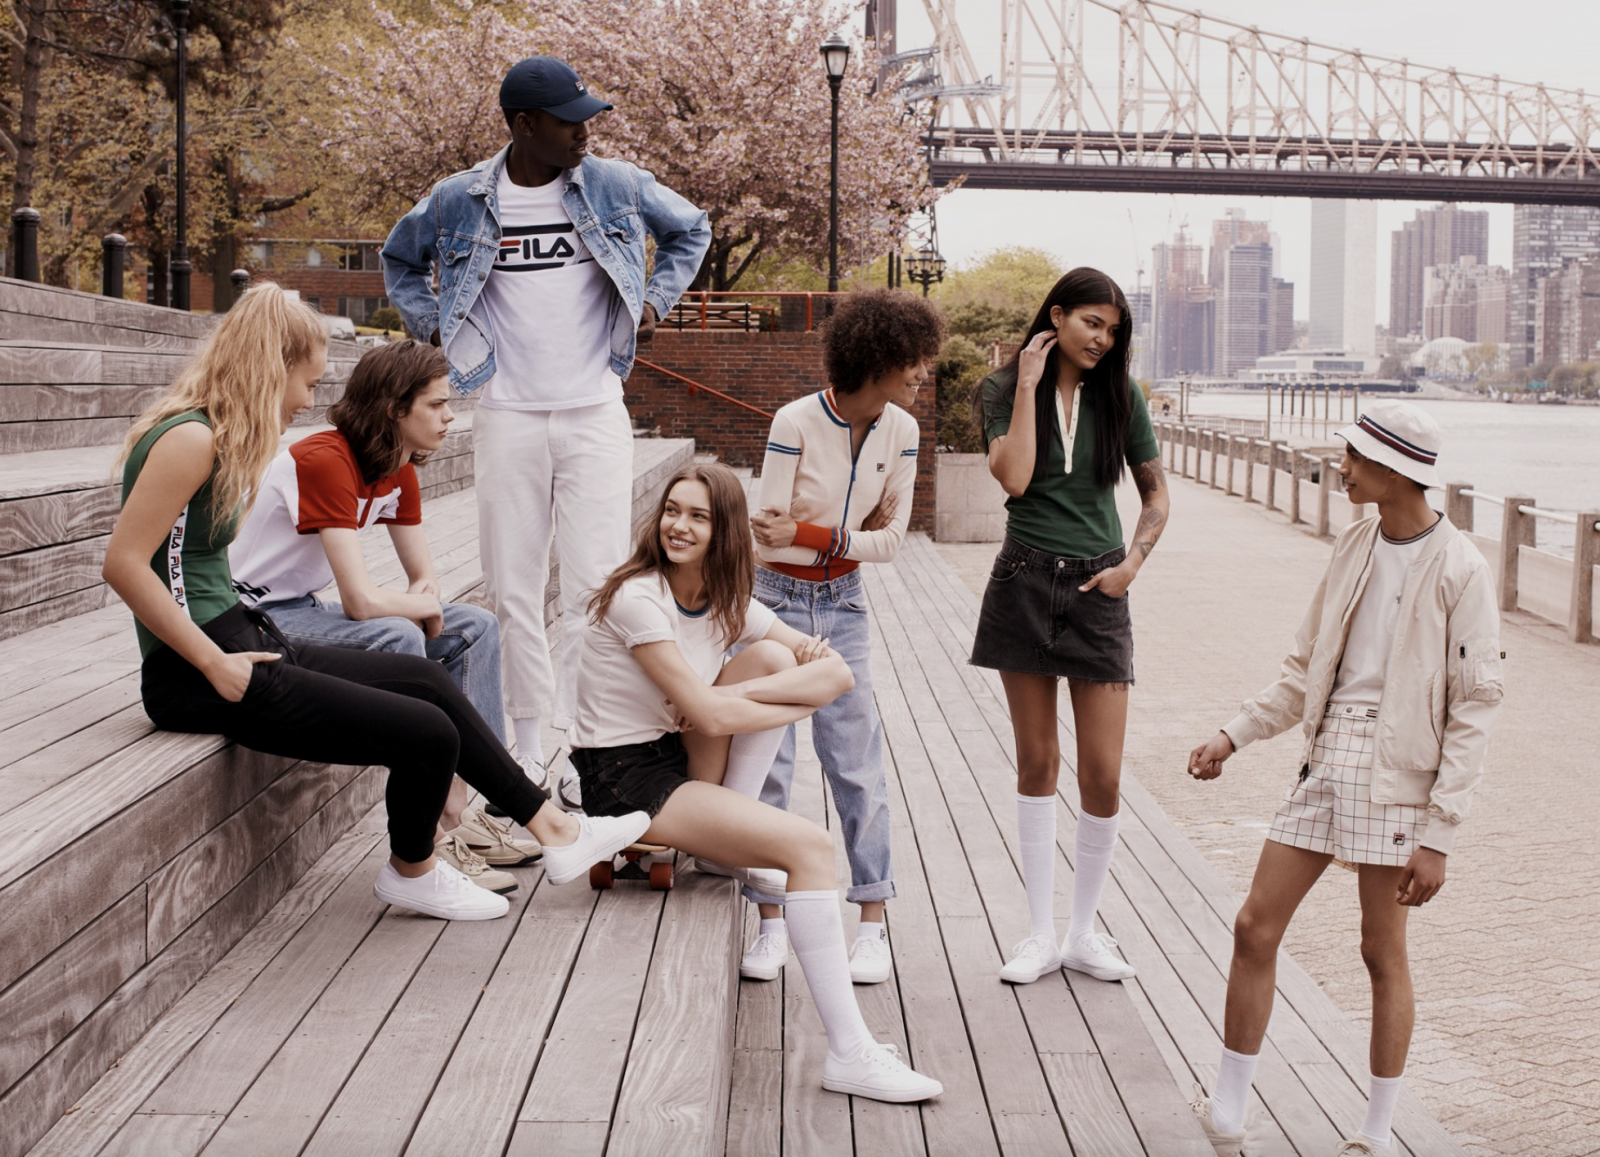 An Urban Outfitters ad campaign